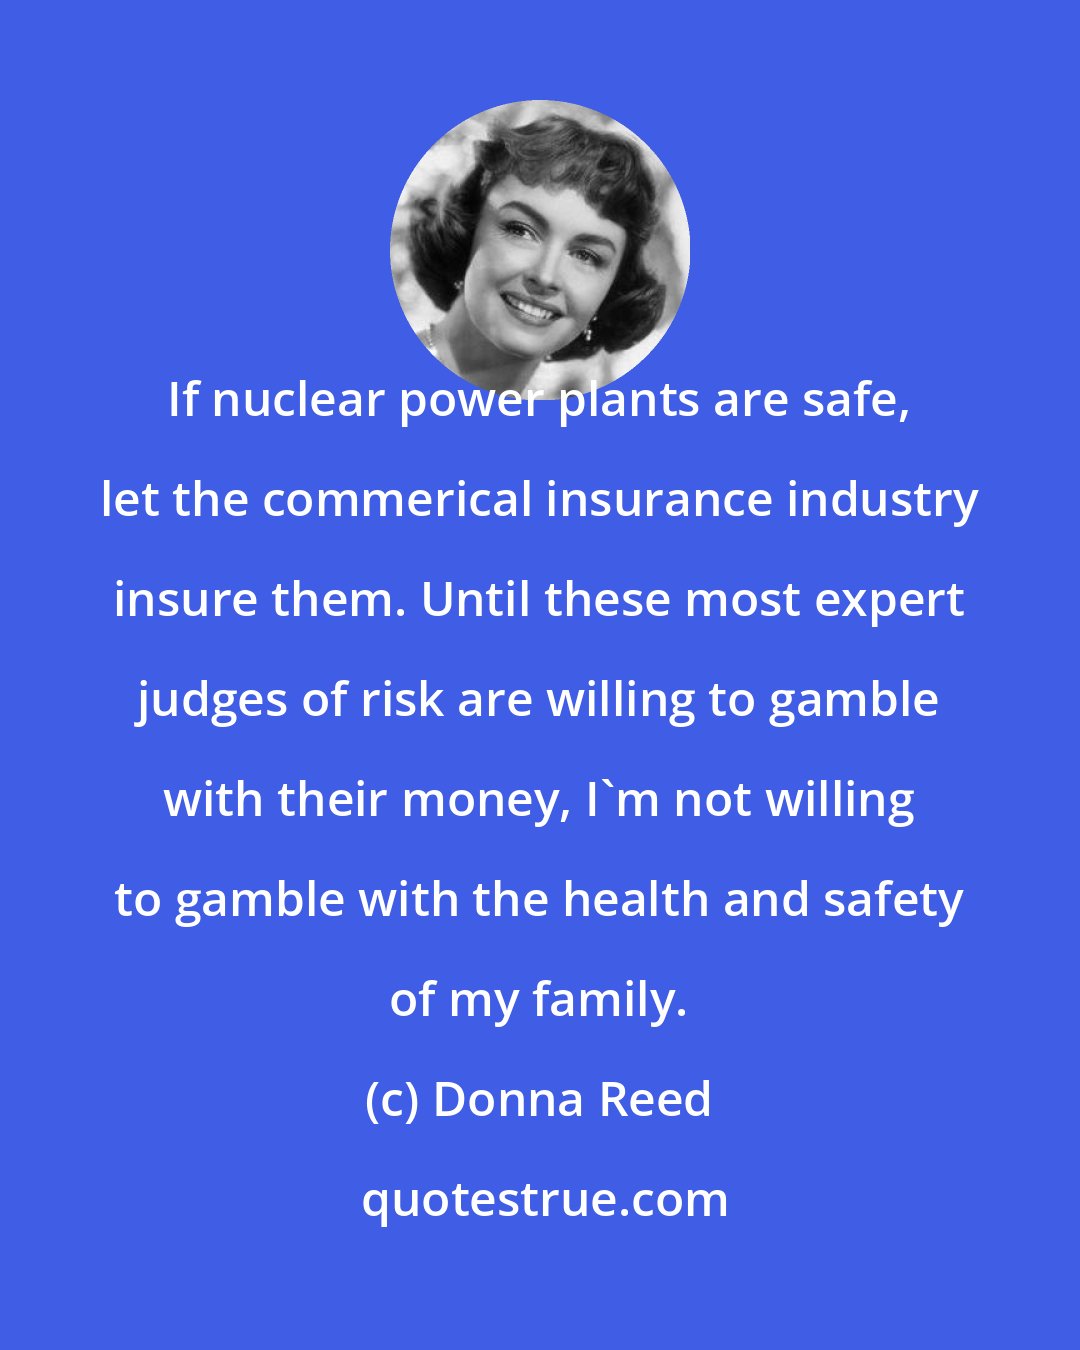 Donna Reed: If nuclear power plants are safe, let the commerical insurance industry insure them. Until these most expert judges of risk are willing to gamble with their money, I'm not willing to gamble with the health and safety of my family.